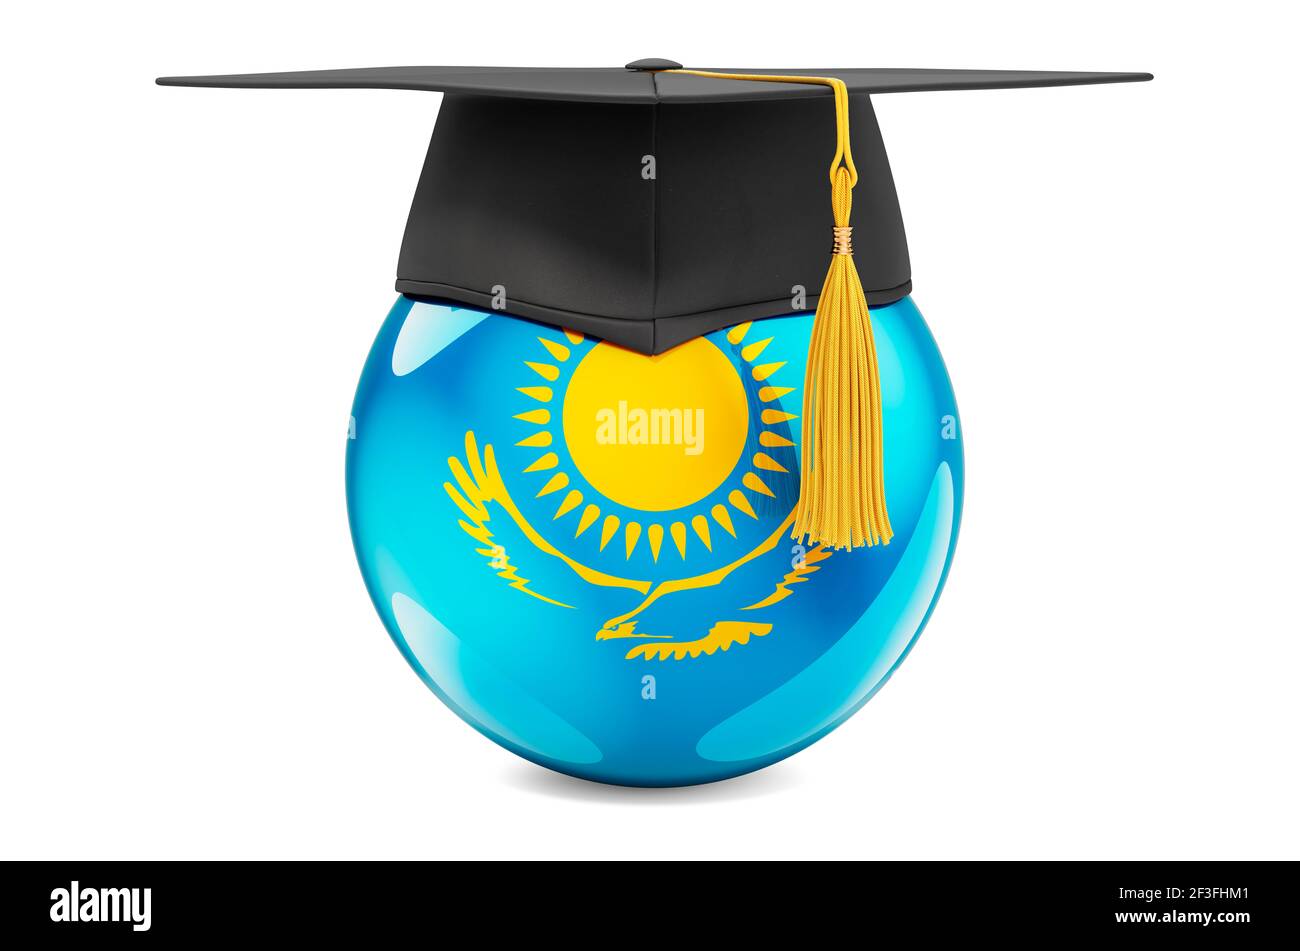 Education in Kazakhstan concept. Kazakh flag with graduation cap, 3D rendering isolated on white background Stock Photo